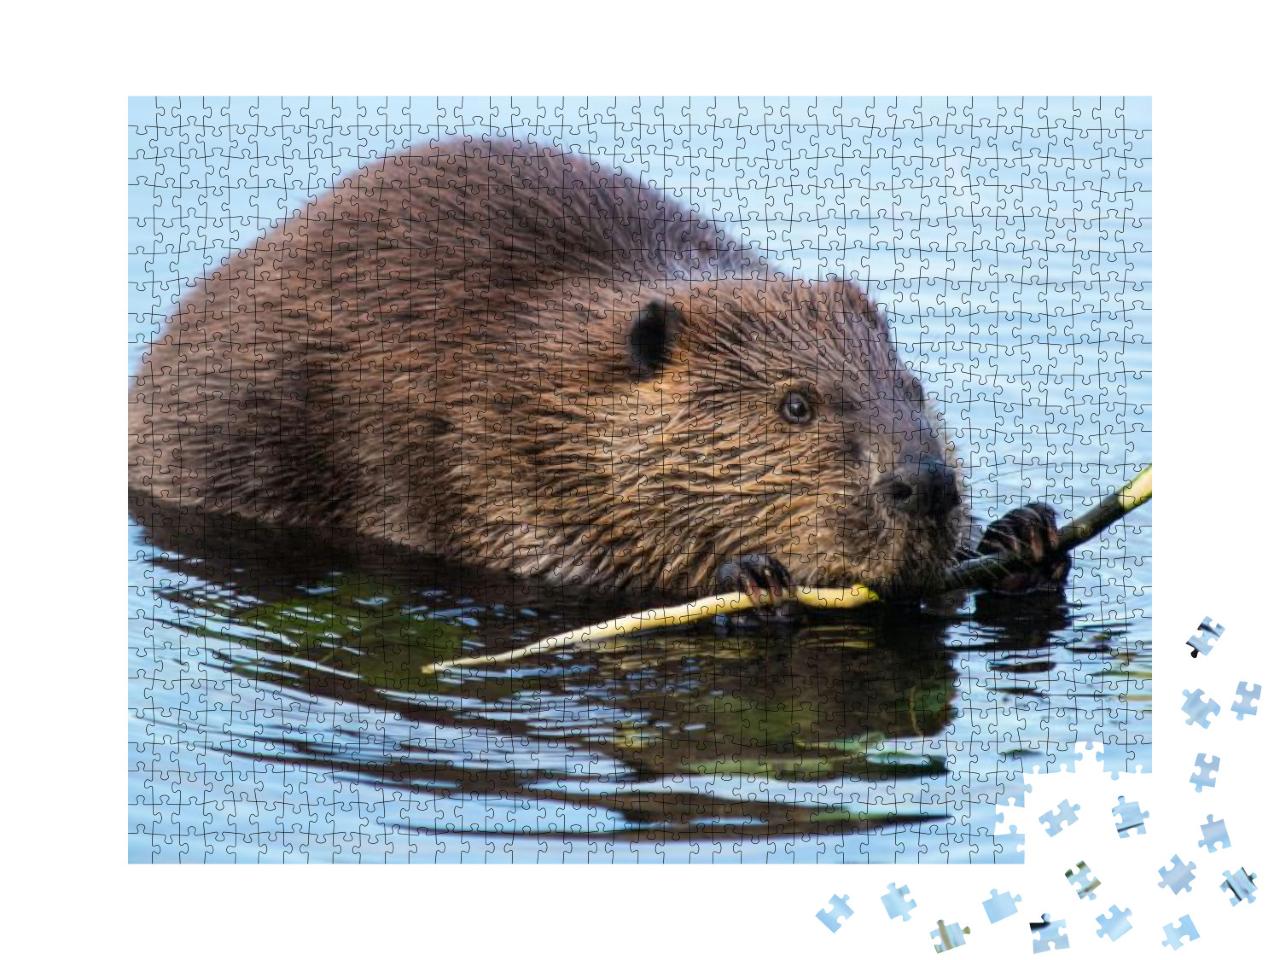 Beaver Munching on Some Bark At Dusk... Jigsaw Puzzle with 1000 pieces